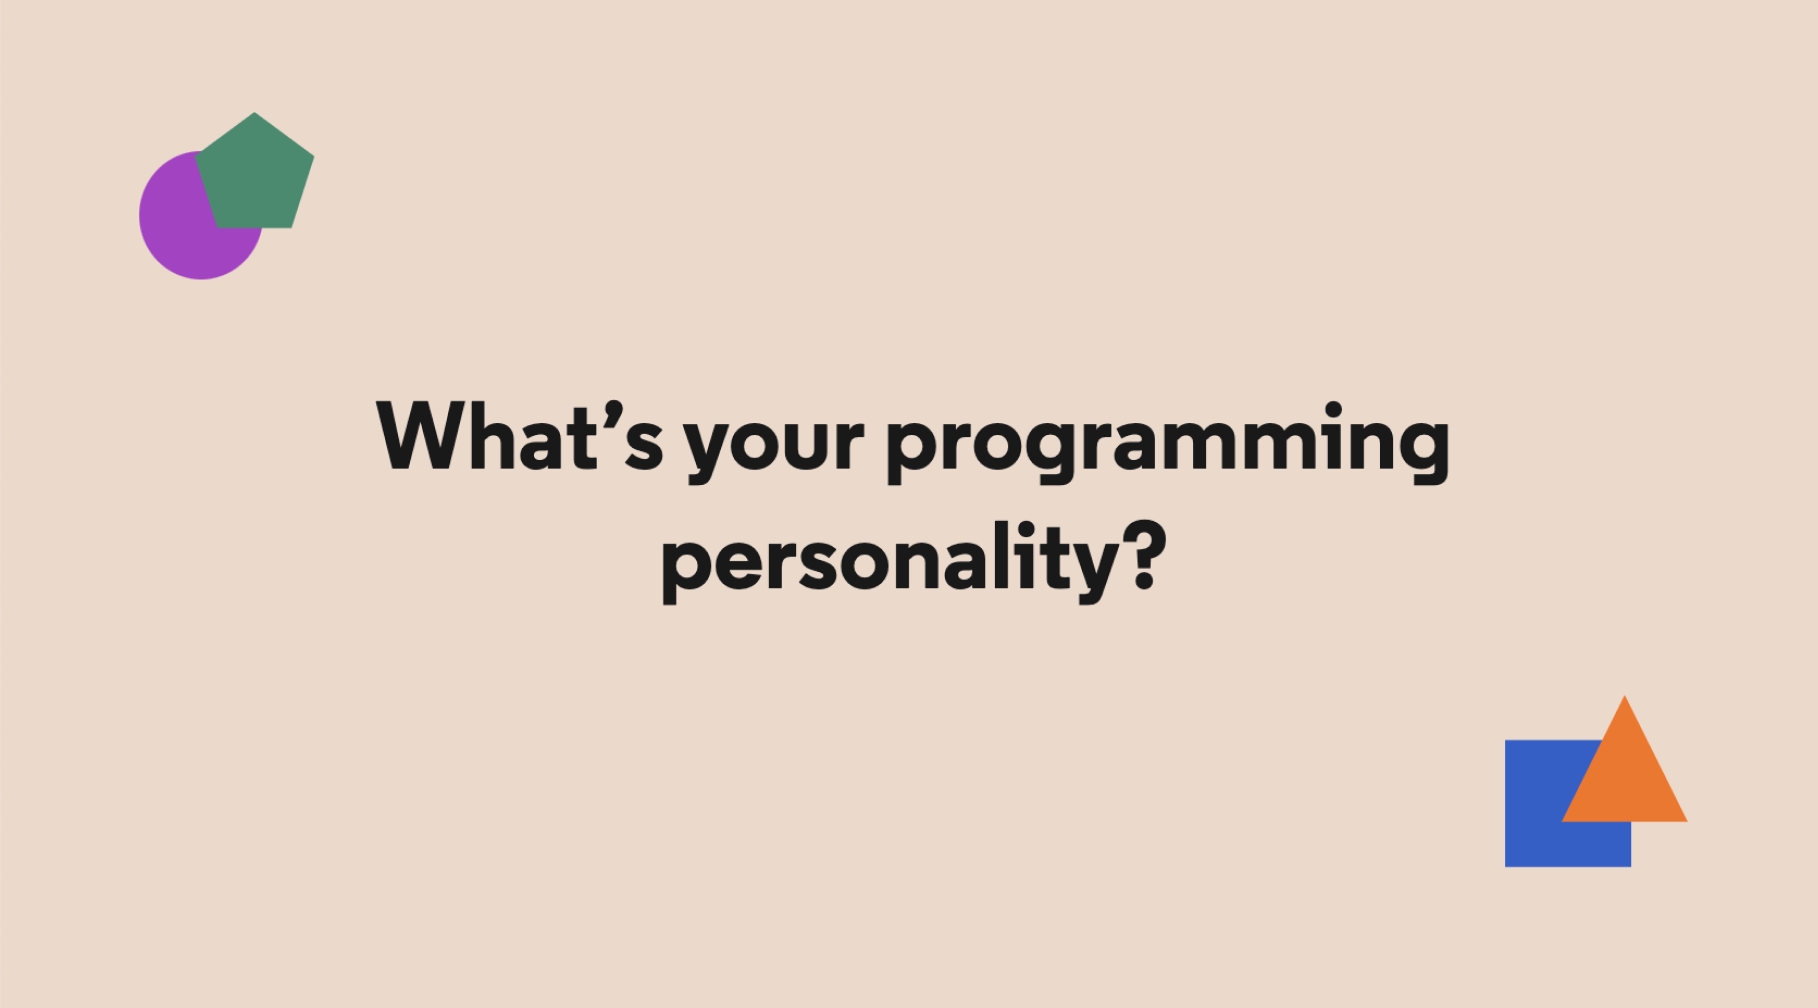 No matter how your brain works, this quiz will help you find a programming language, course, and career that clicks. __[Start quiz](https://www.codecademy.com/explore/sorting-quiz)__